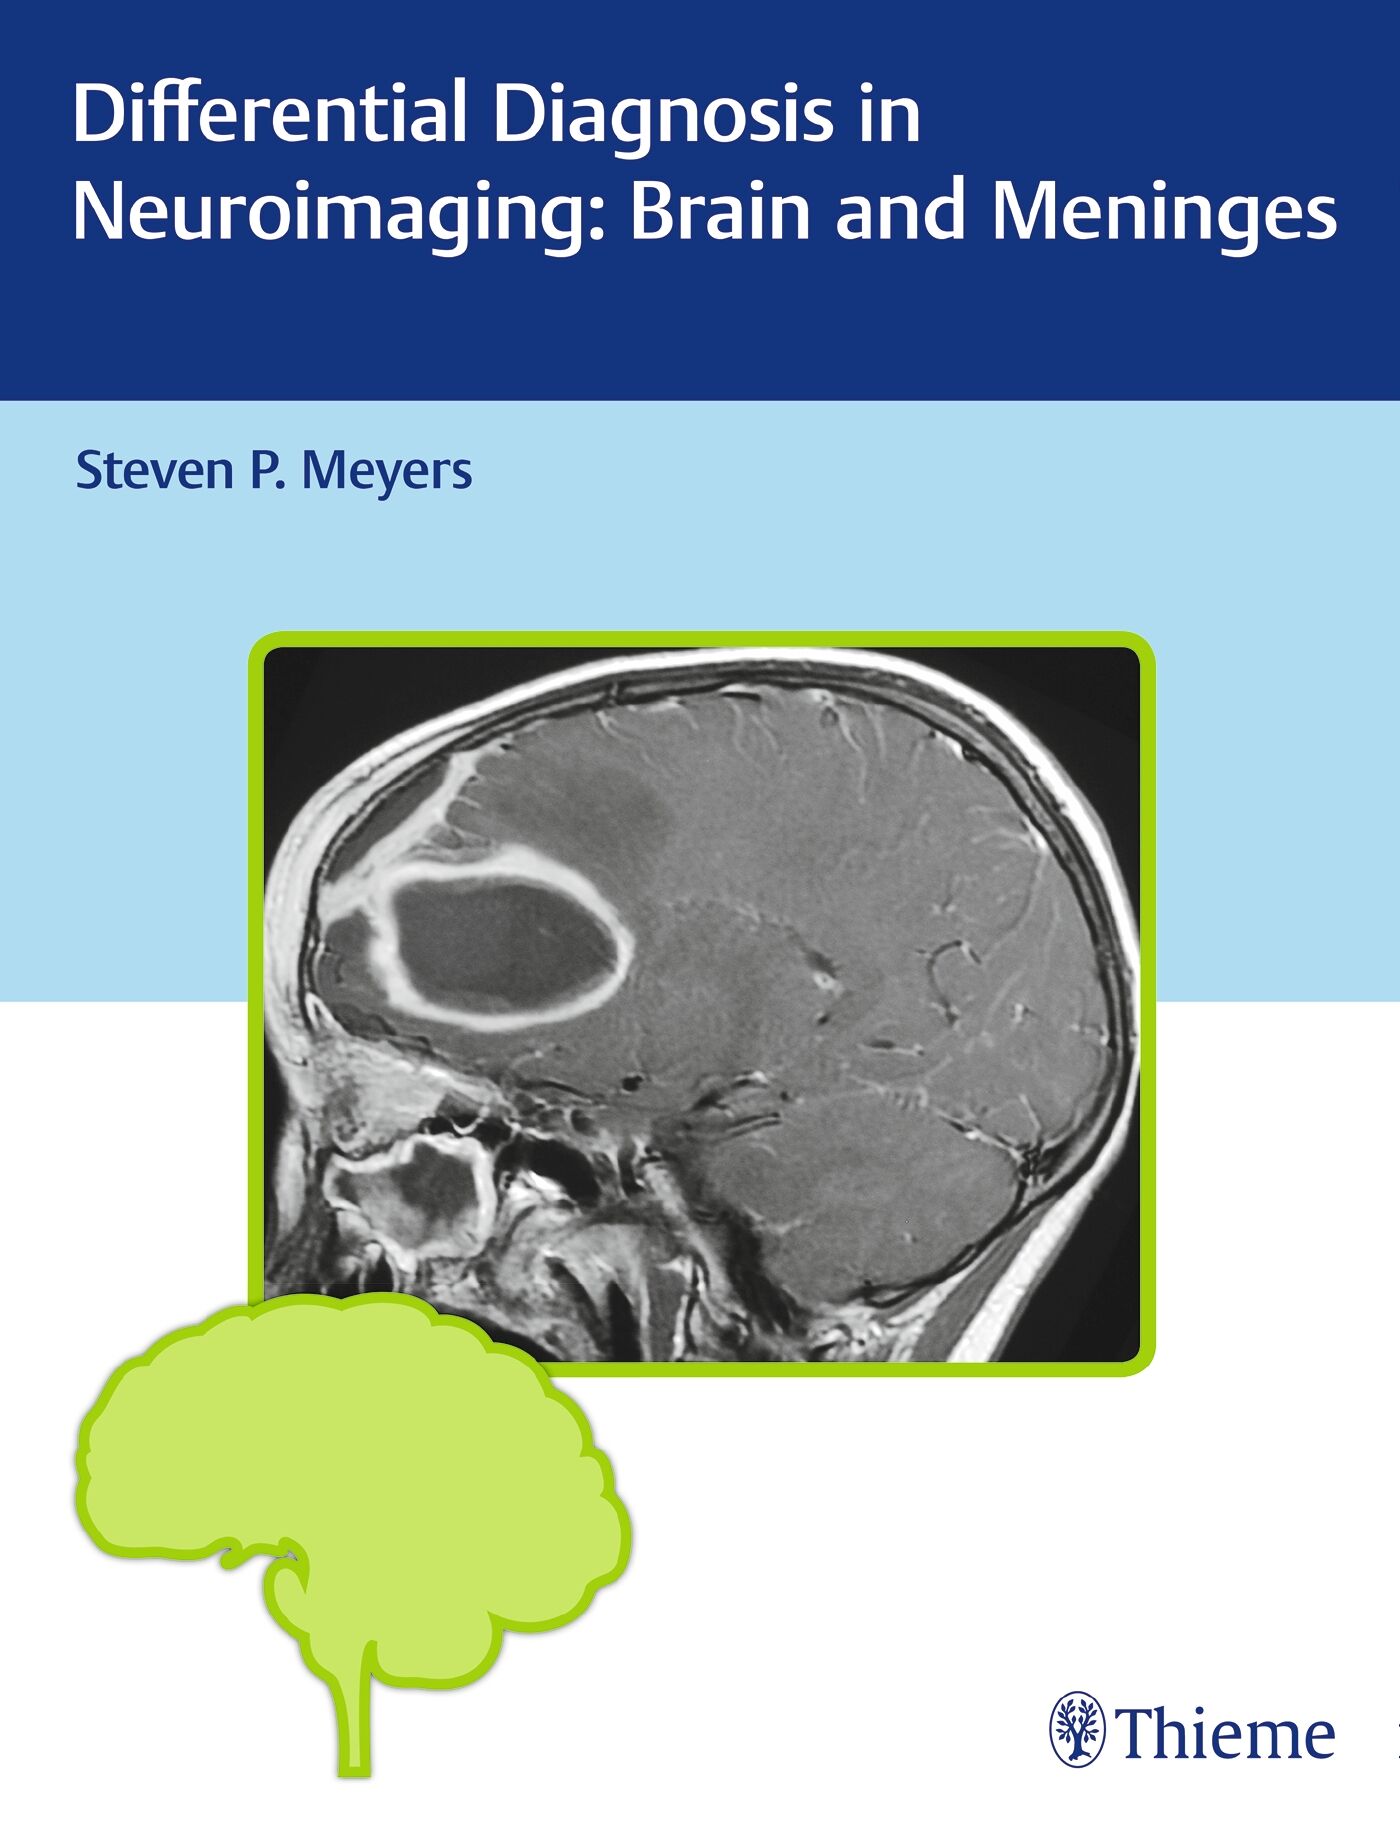 Differential Diagnosis in Neuroimaging: Brain and Meninges, 9781604067002